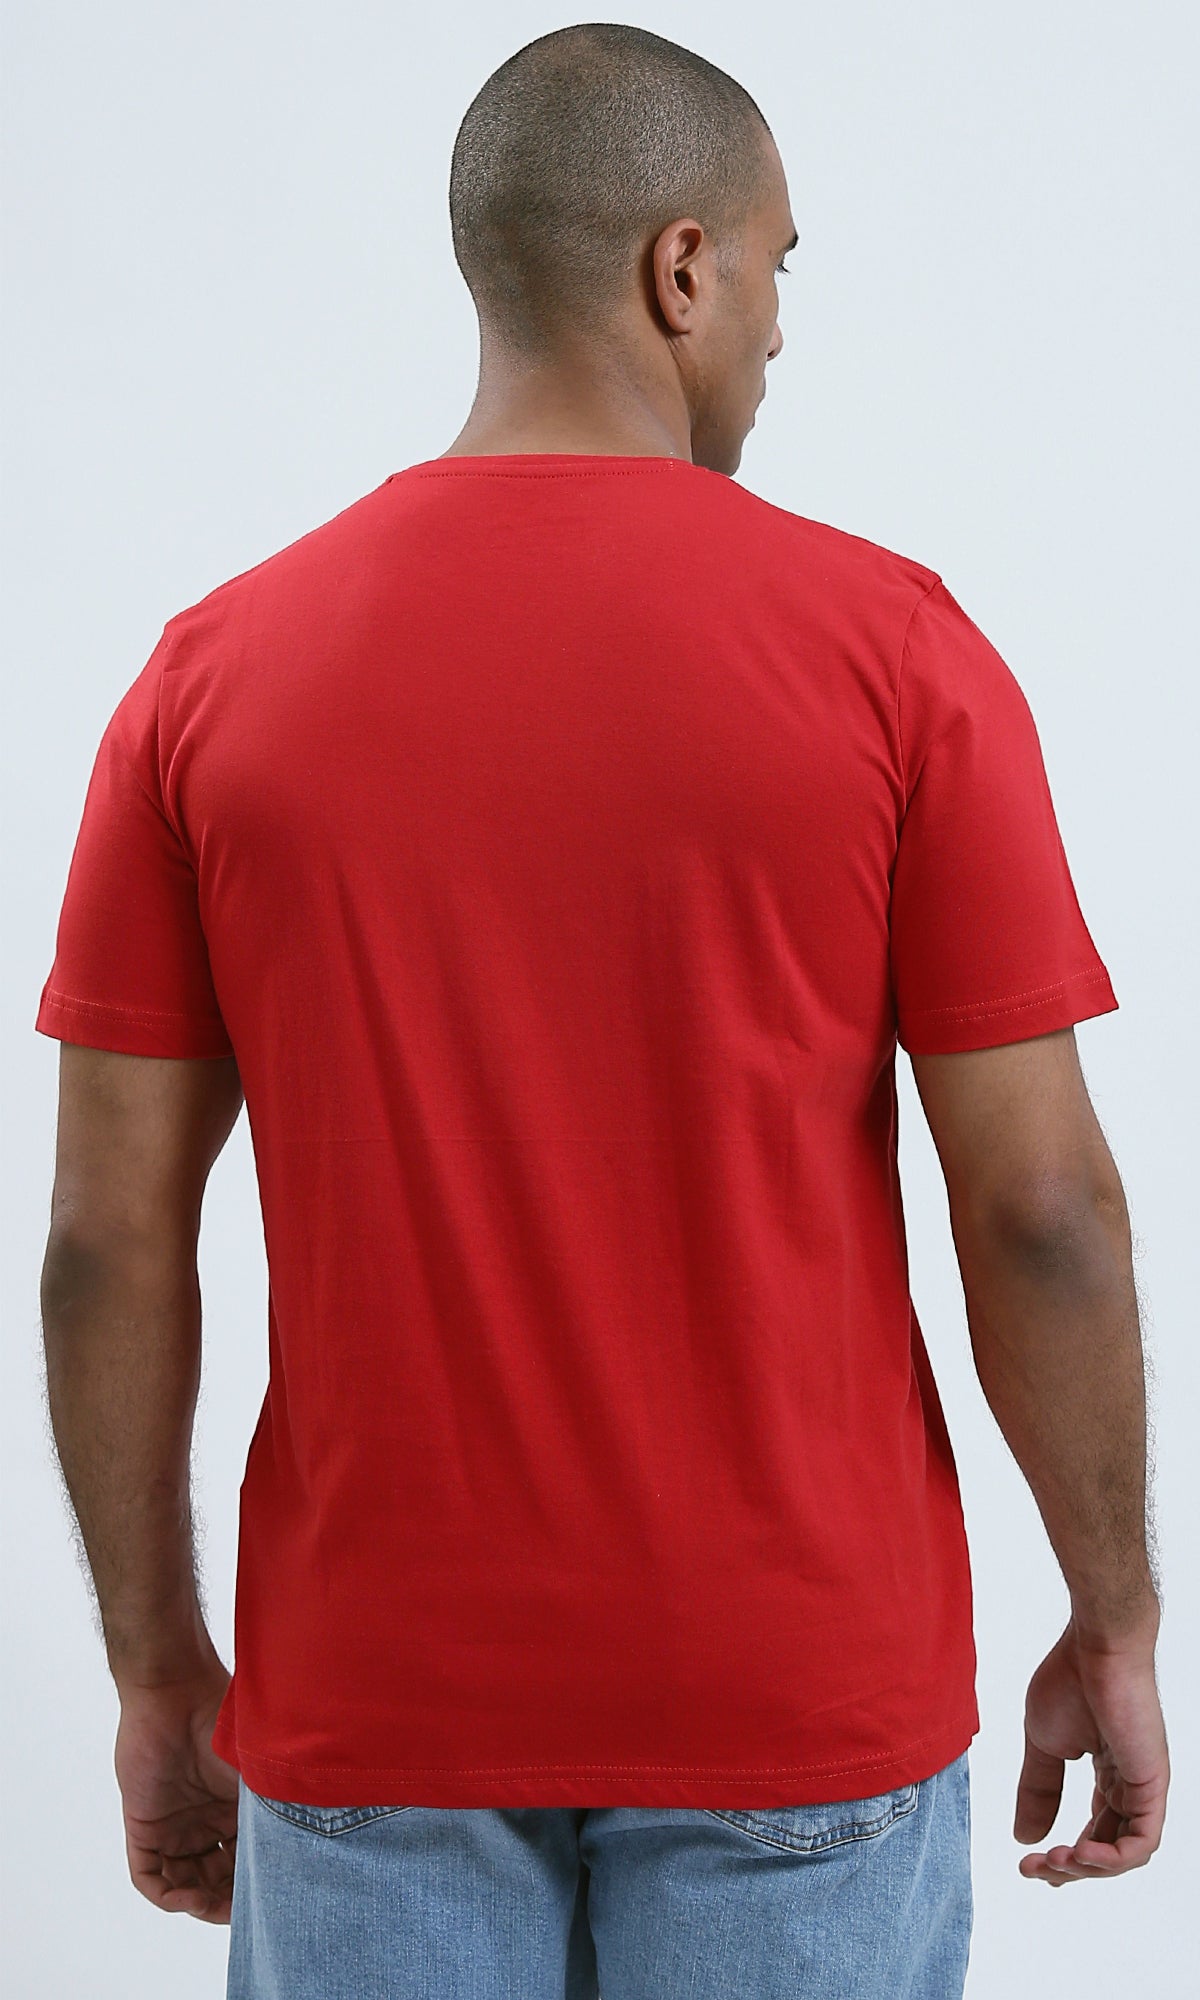 O182388 Short Sleeves Red Cotton Short Tee